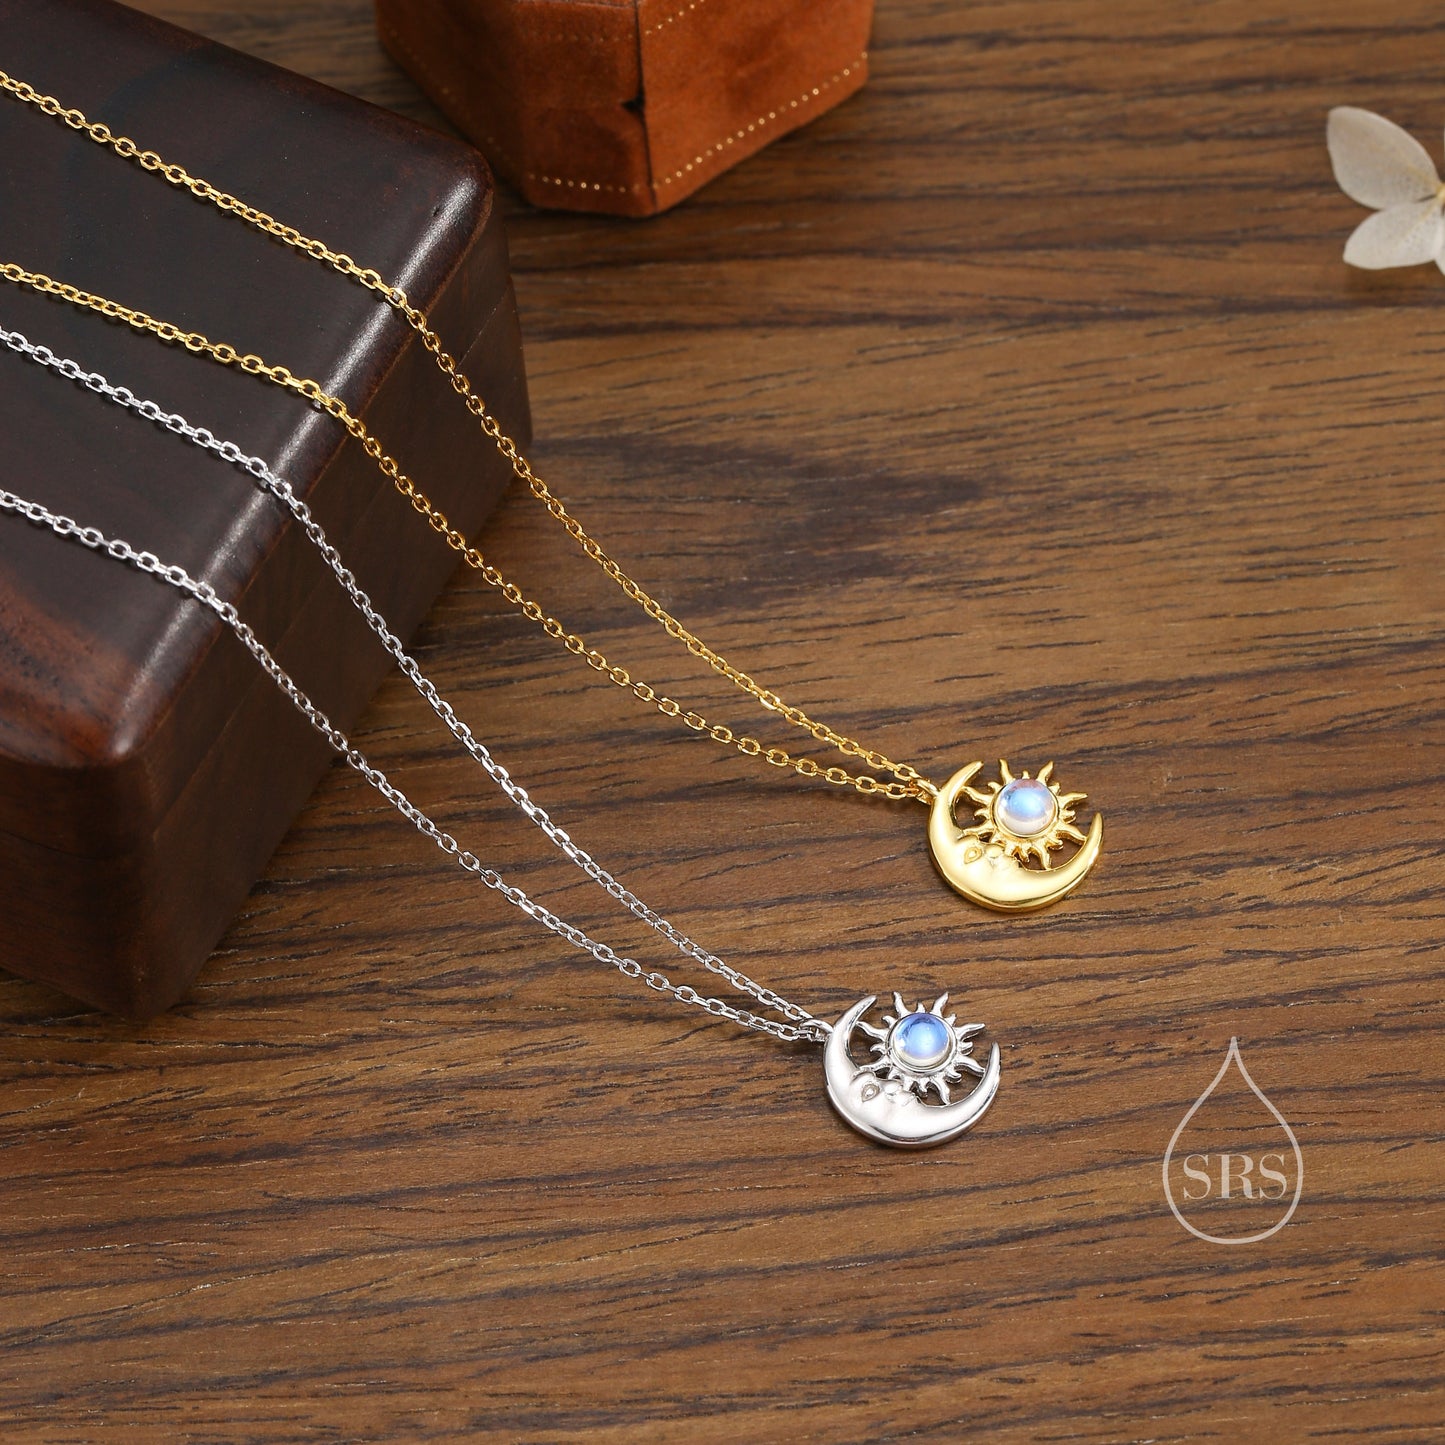 Moonstone Moon and Star Pendant Necklace in Sterling Silver, Silver or Gold, Man in the Moon, Moonstone Starburst, Moon and Sun, Moon Face